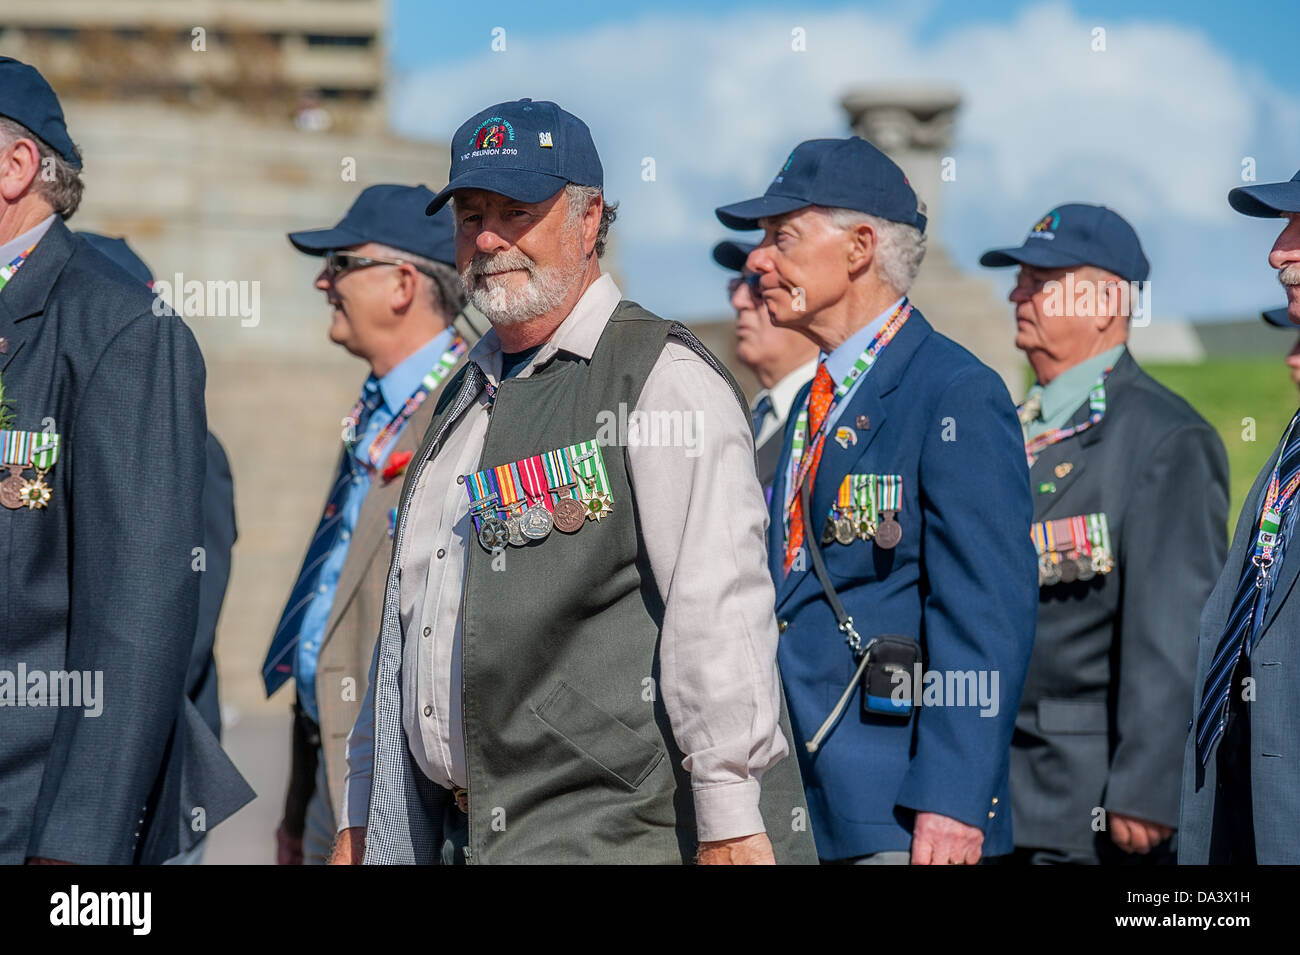 Thousands attend Anzac Day marches across Australia to pay respects to service men and women and fallen war heroes. Stock Photo